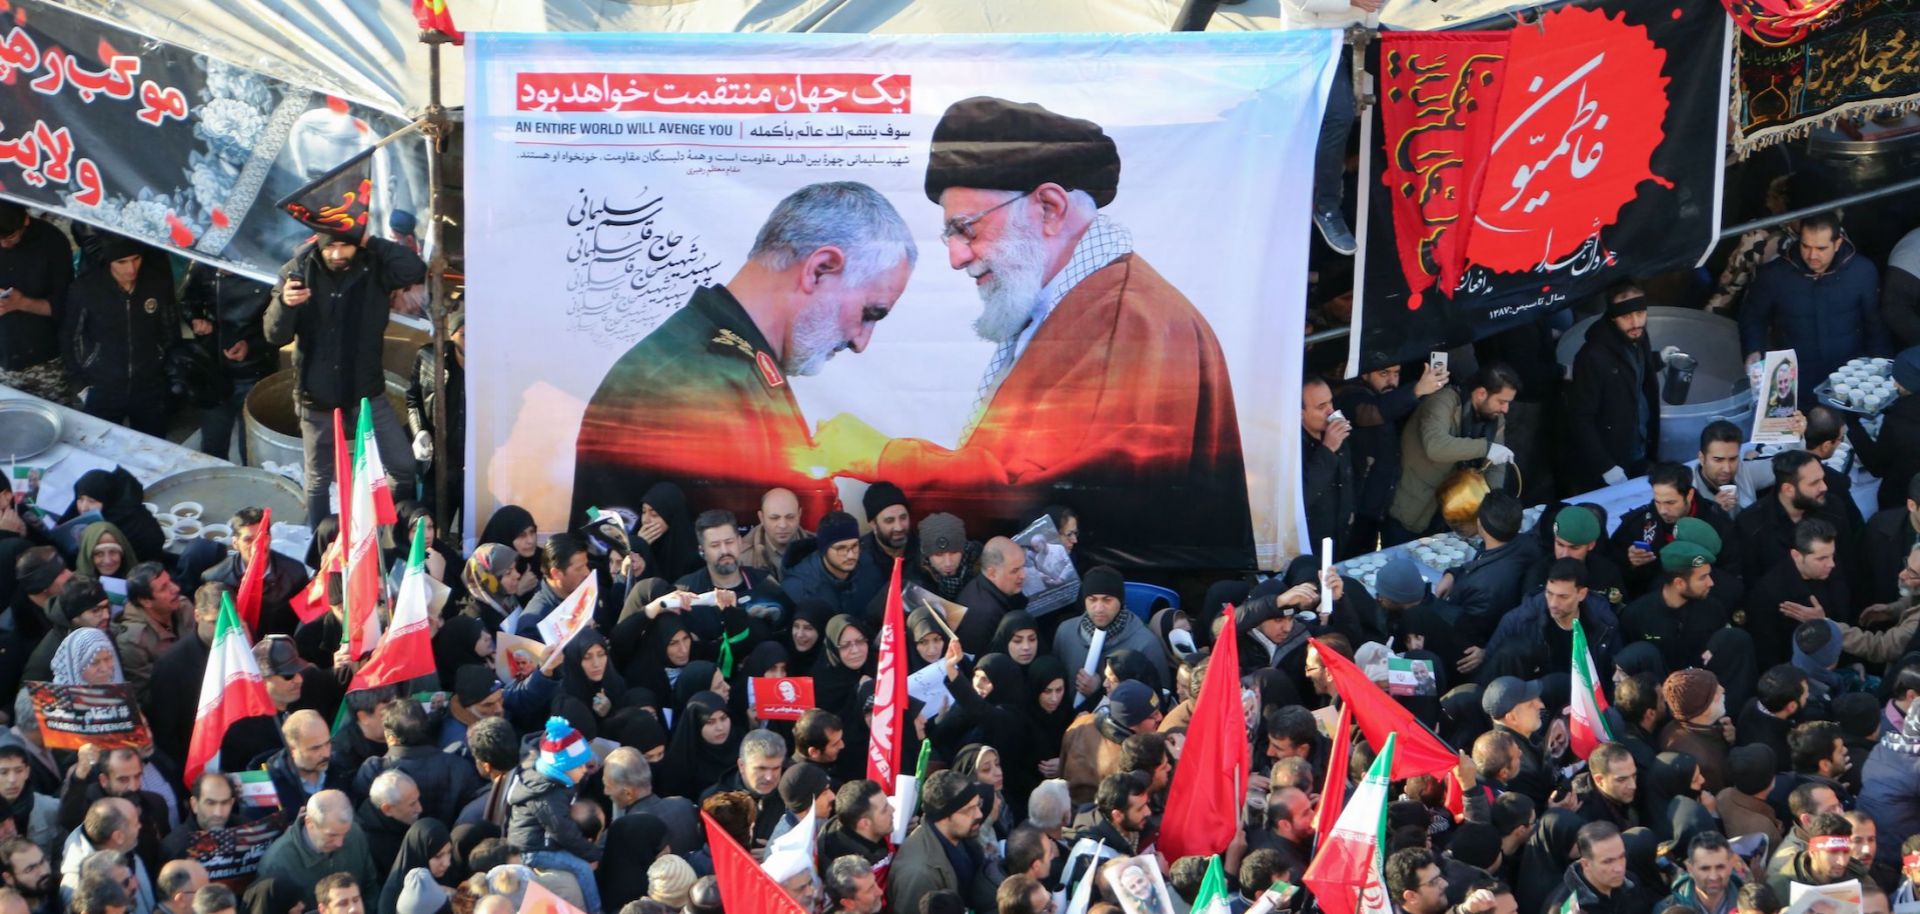 Mourners in Tehran carry a banner featuring Maj. Gen. Qassem Soleimani and Supreme Leader Ayatollah Ali Khamenei during the military leader's funeral procession on Jan. 6.